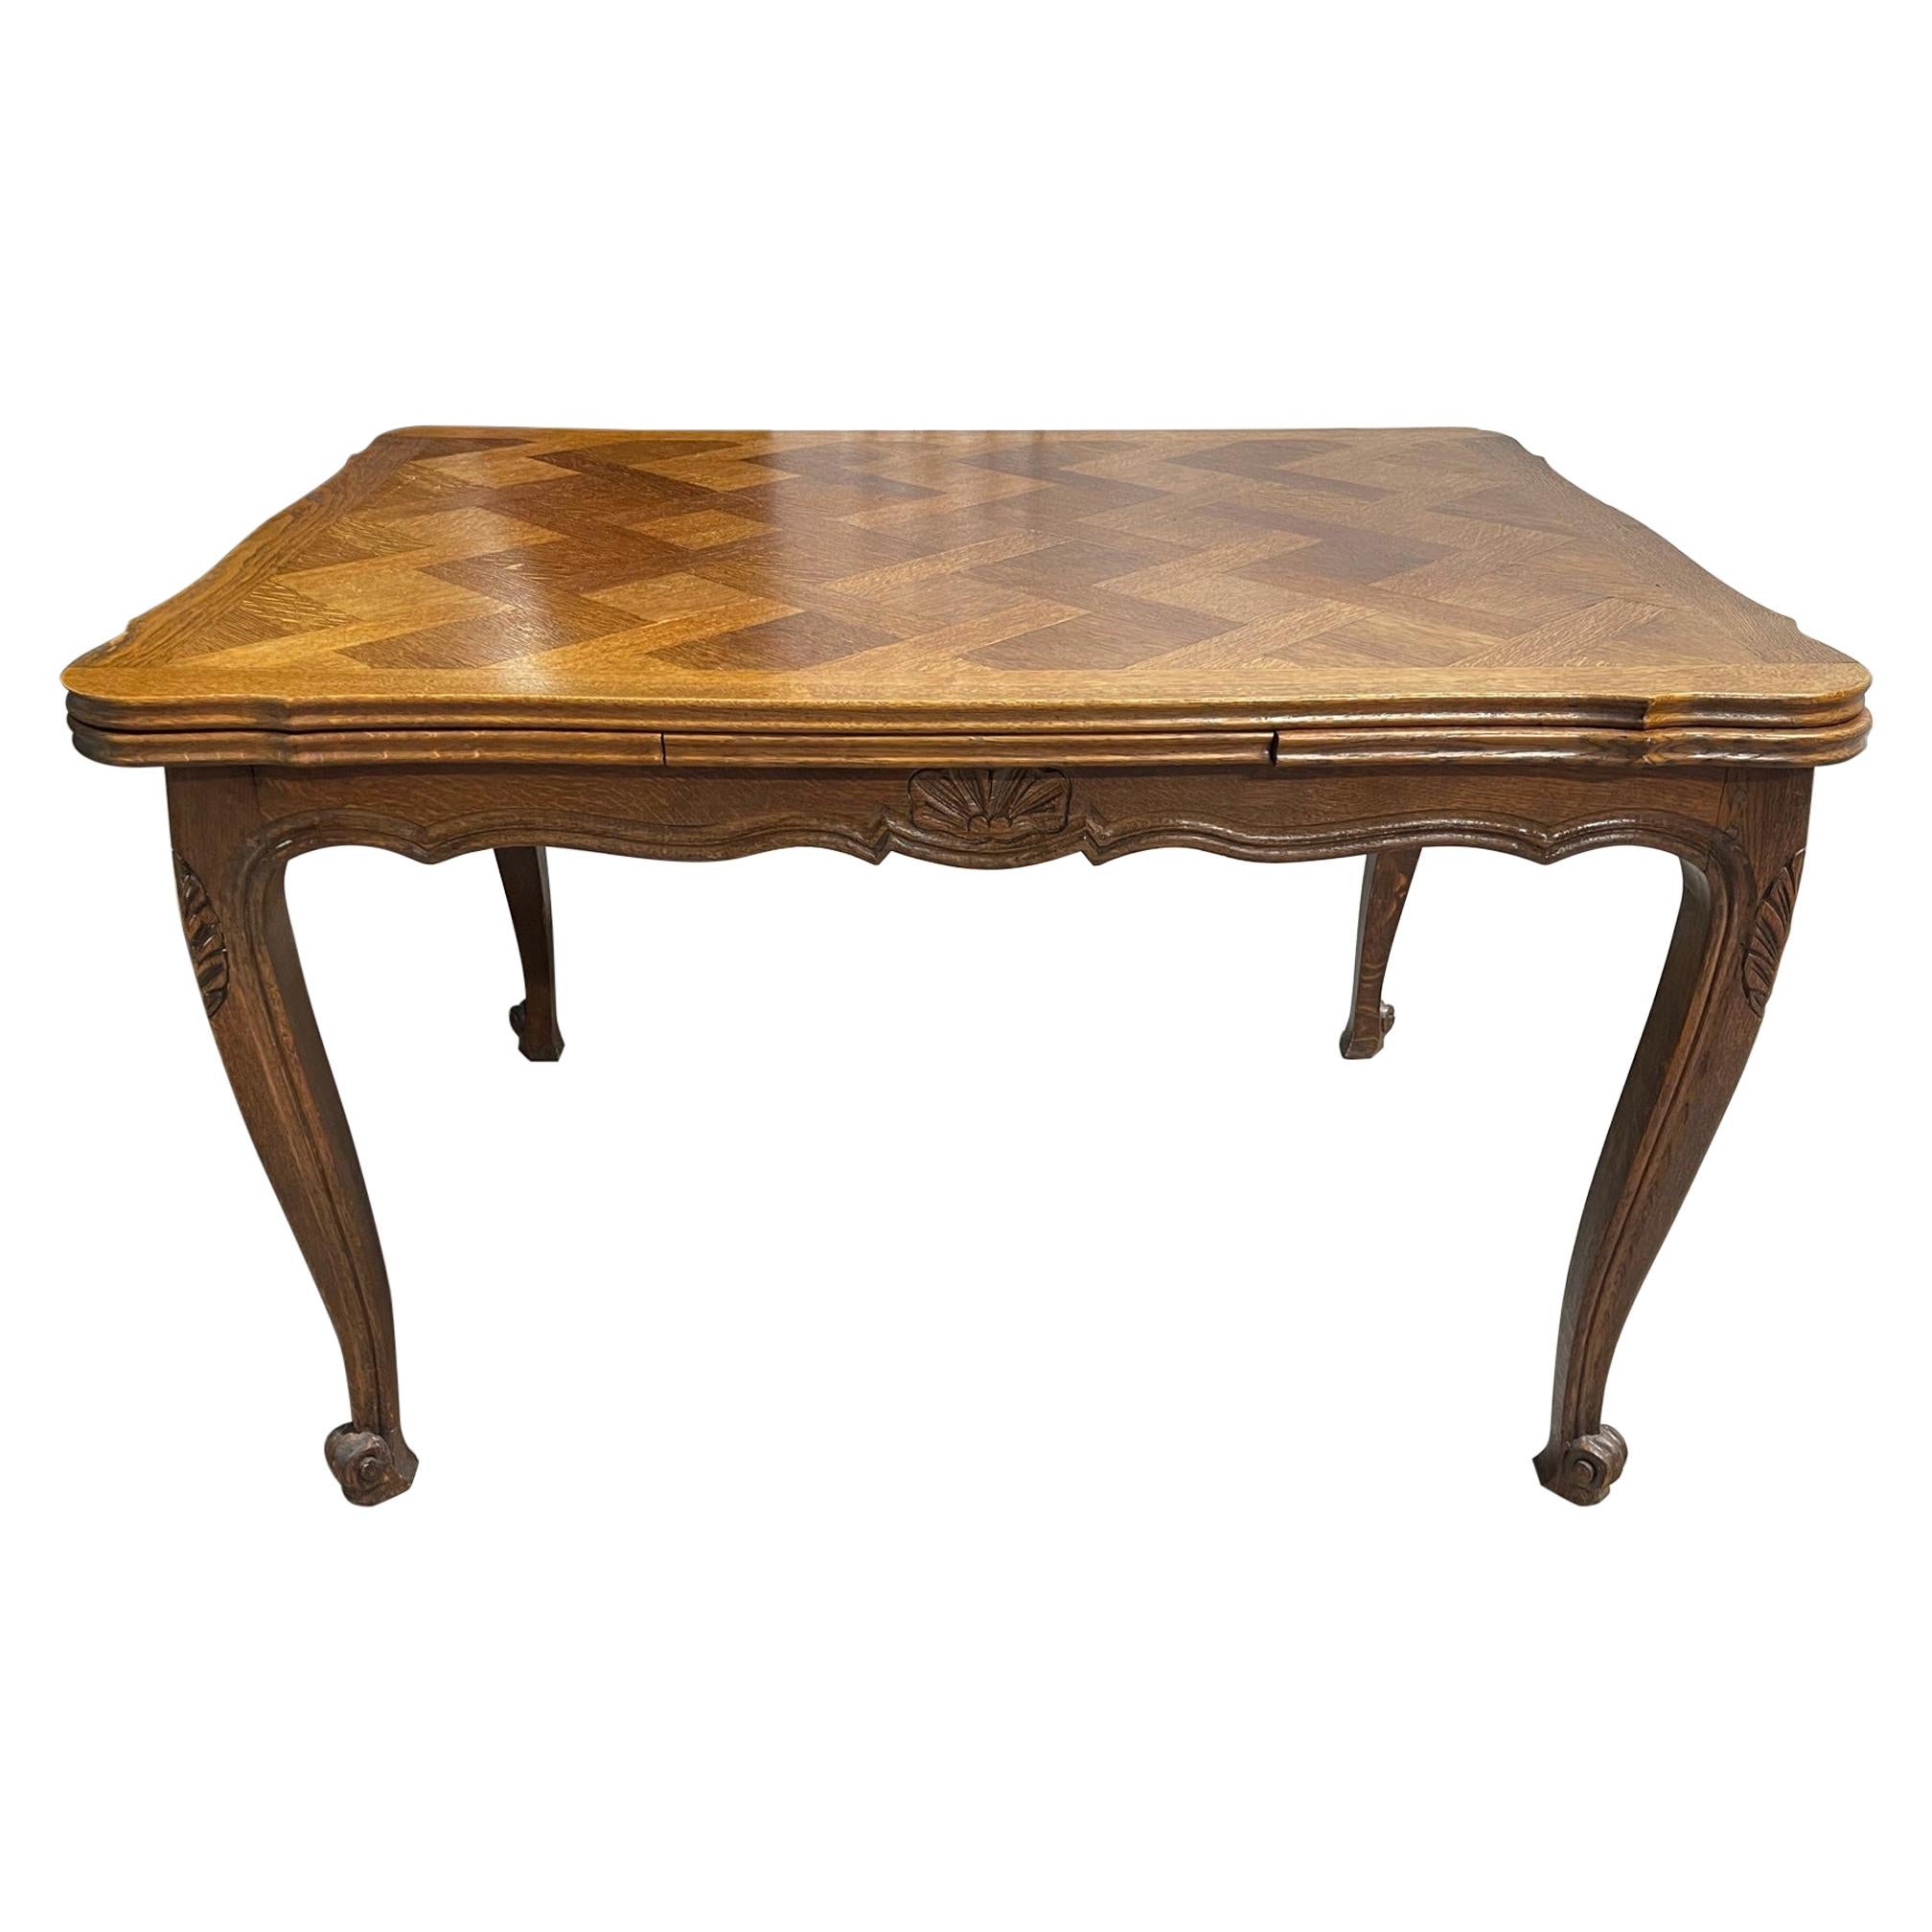 French Provincial Style Oak Parquet Top Draw Leaf Dining Table, 20th Century